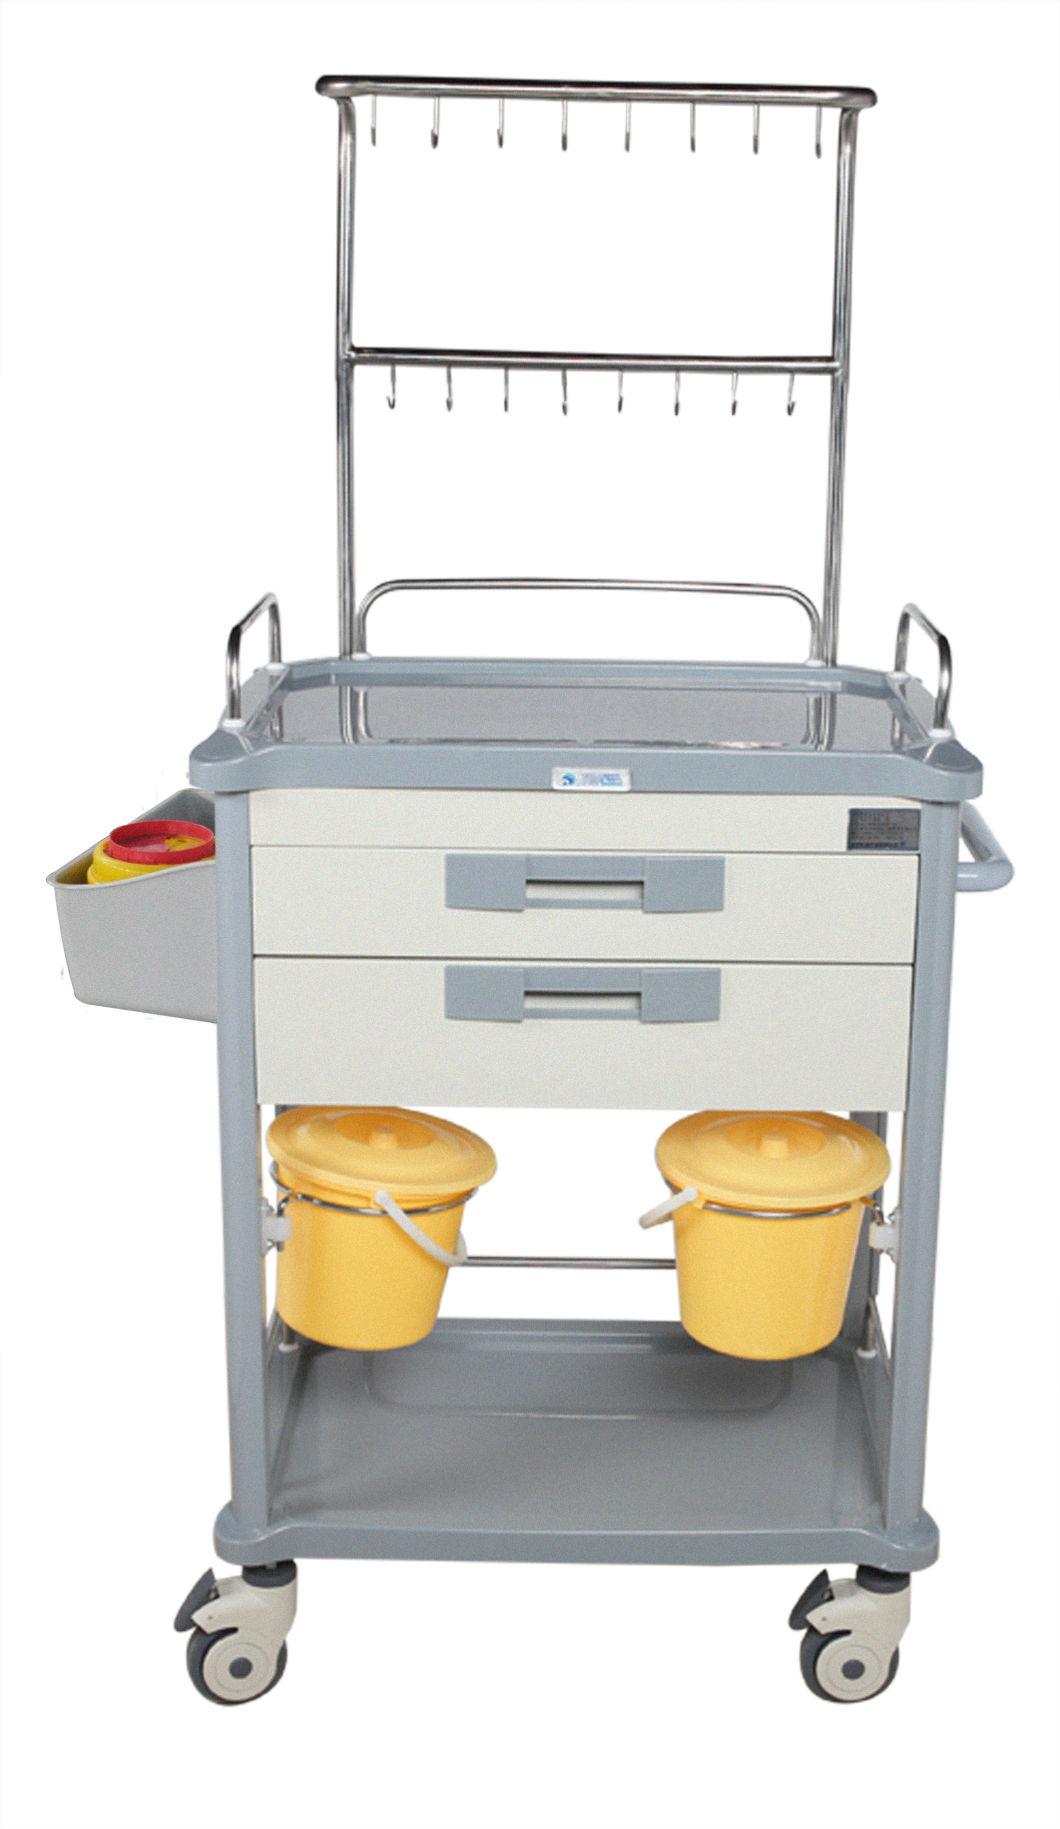 Best Price Good Quality Mountain Medical Equipment Anesthesia Trolley Cart with 5 Drawers